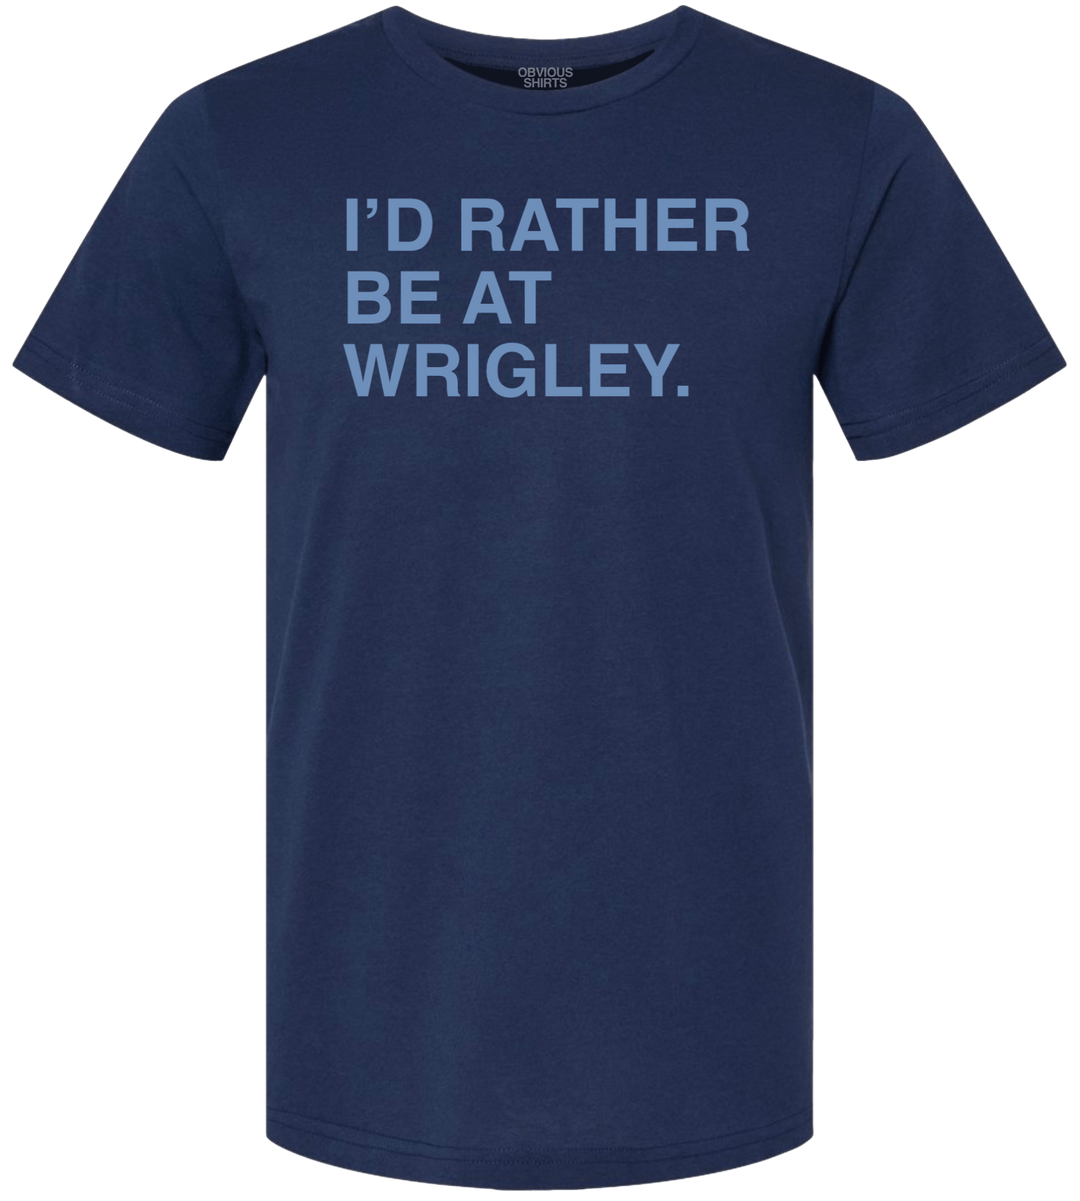 I'D RATHER BE AT WRIGLEY. (WRIGLEYVILLE EDITION) - OBVIOUS SHIRTS